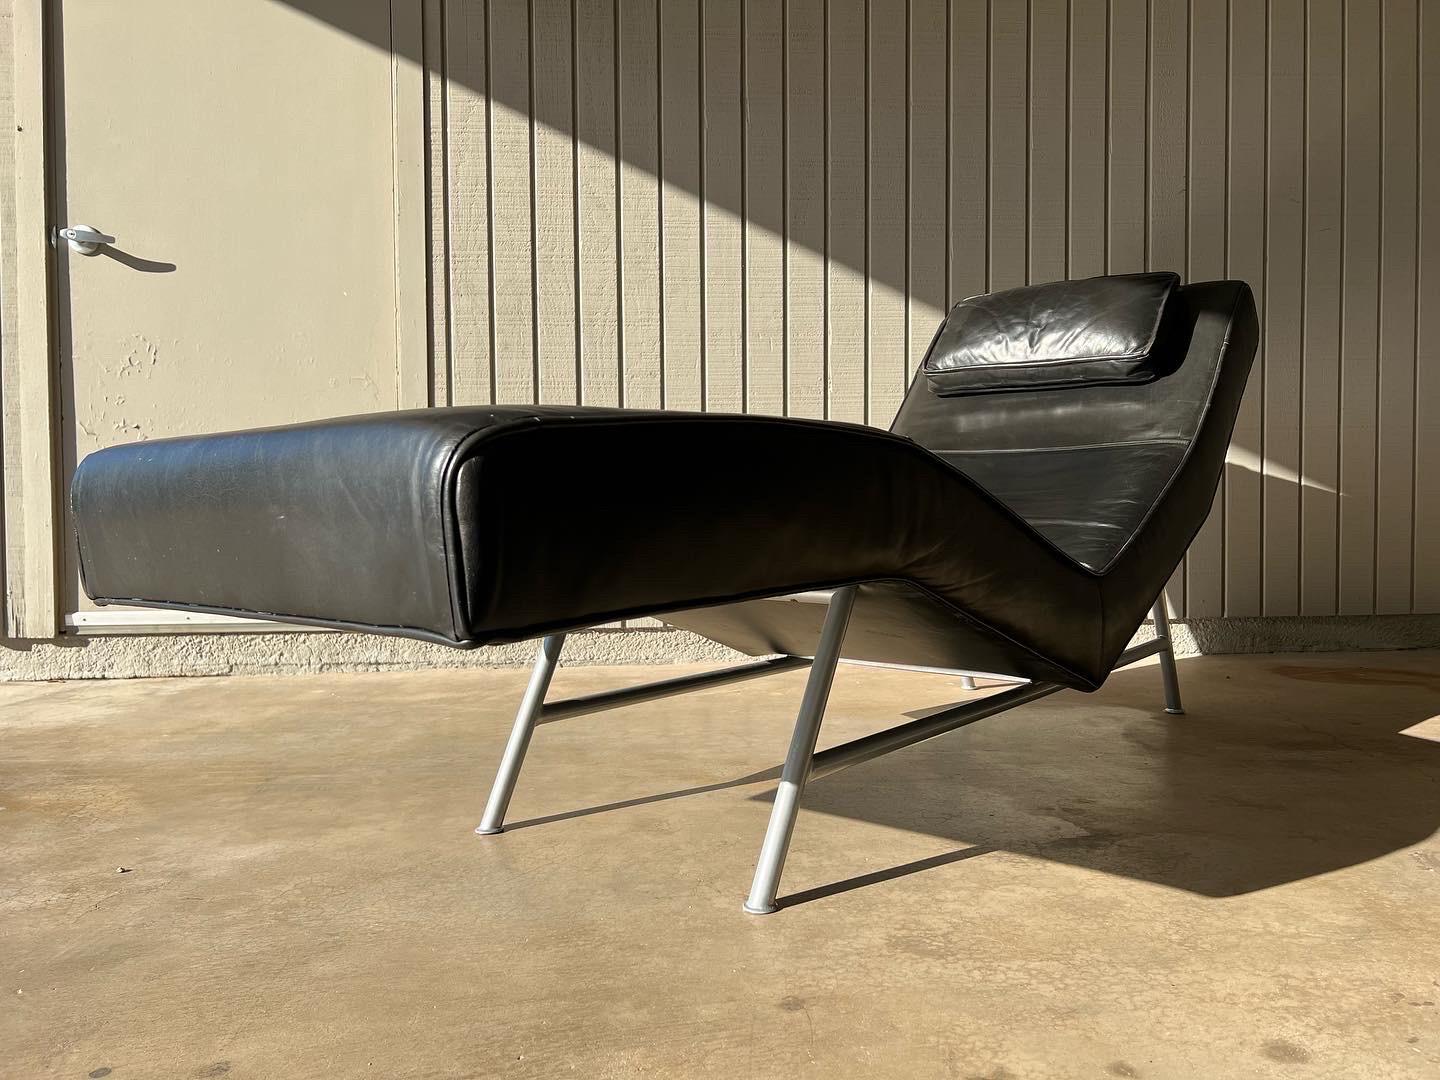 Milo Baughman “Fred” chaise lounge chair for Thayer Coggin in black leather on a brushed stainless steel base. This was one of Milo Baughman’s initial design proposals to Thayer Coggin in 1953. It features a form fitting design with an attached